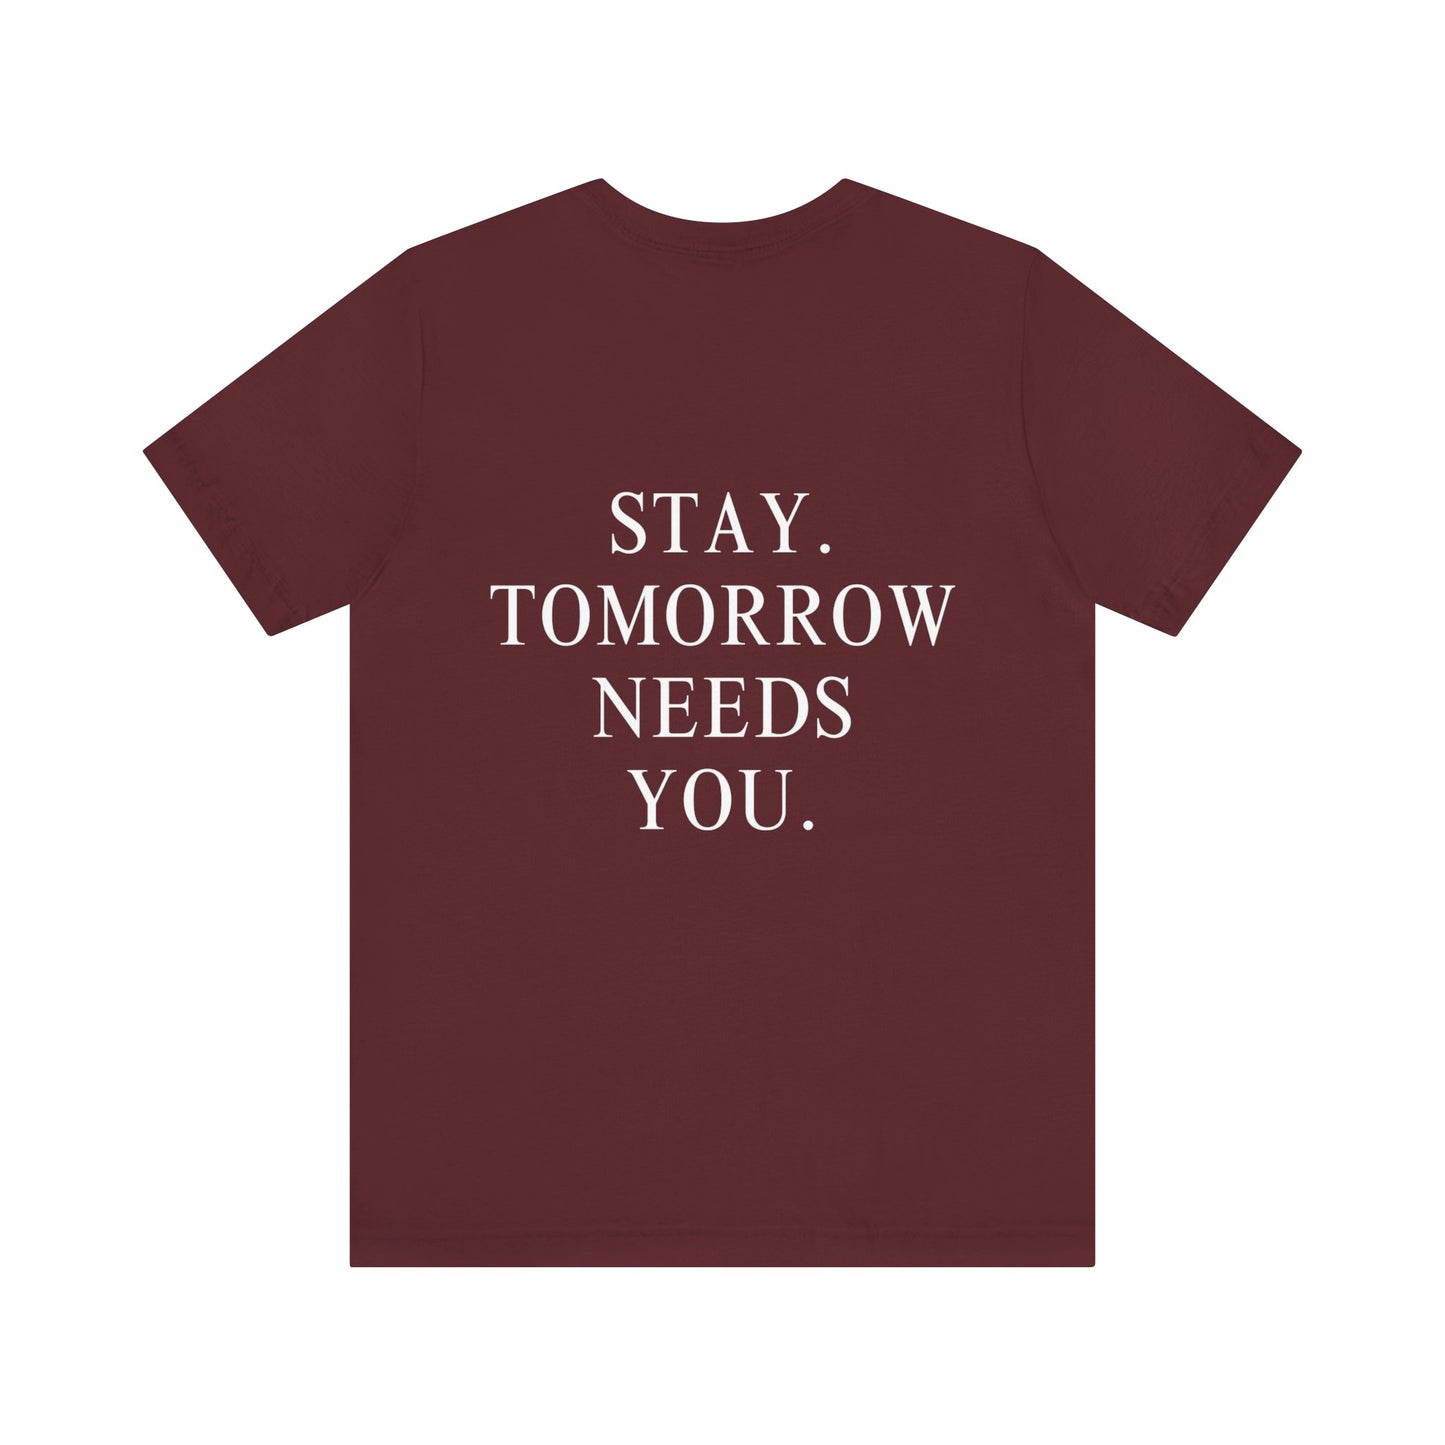 Stay Tomorrow Needs You Suicide Prevention Mental Health Awareness T Shirt, Mothers Day, Fathers Day, Military Gift, Veterans Mental Health Support, Gift Idea TikTok - Stay Tomorrow Needs You Stay Tomorrow Needs You Suicide Prevention Mental Health Awareness T Shirt, Mothers Day, Fathers Day, Military Gift, Veterans Mental Health Support, Gift Idea TikTok